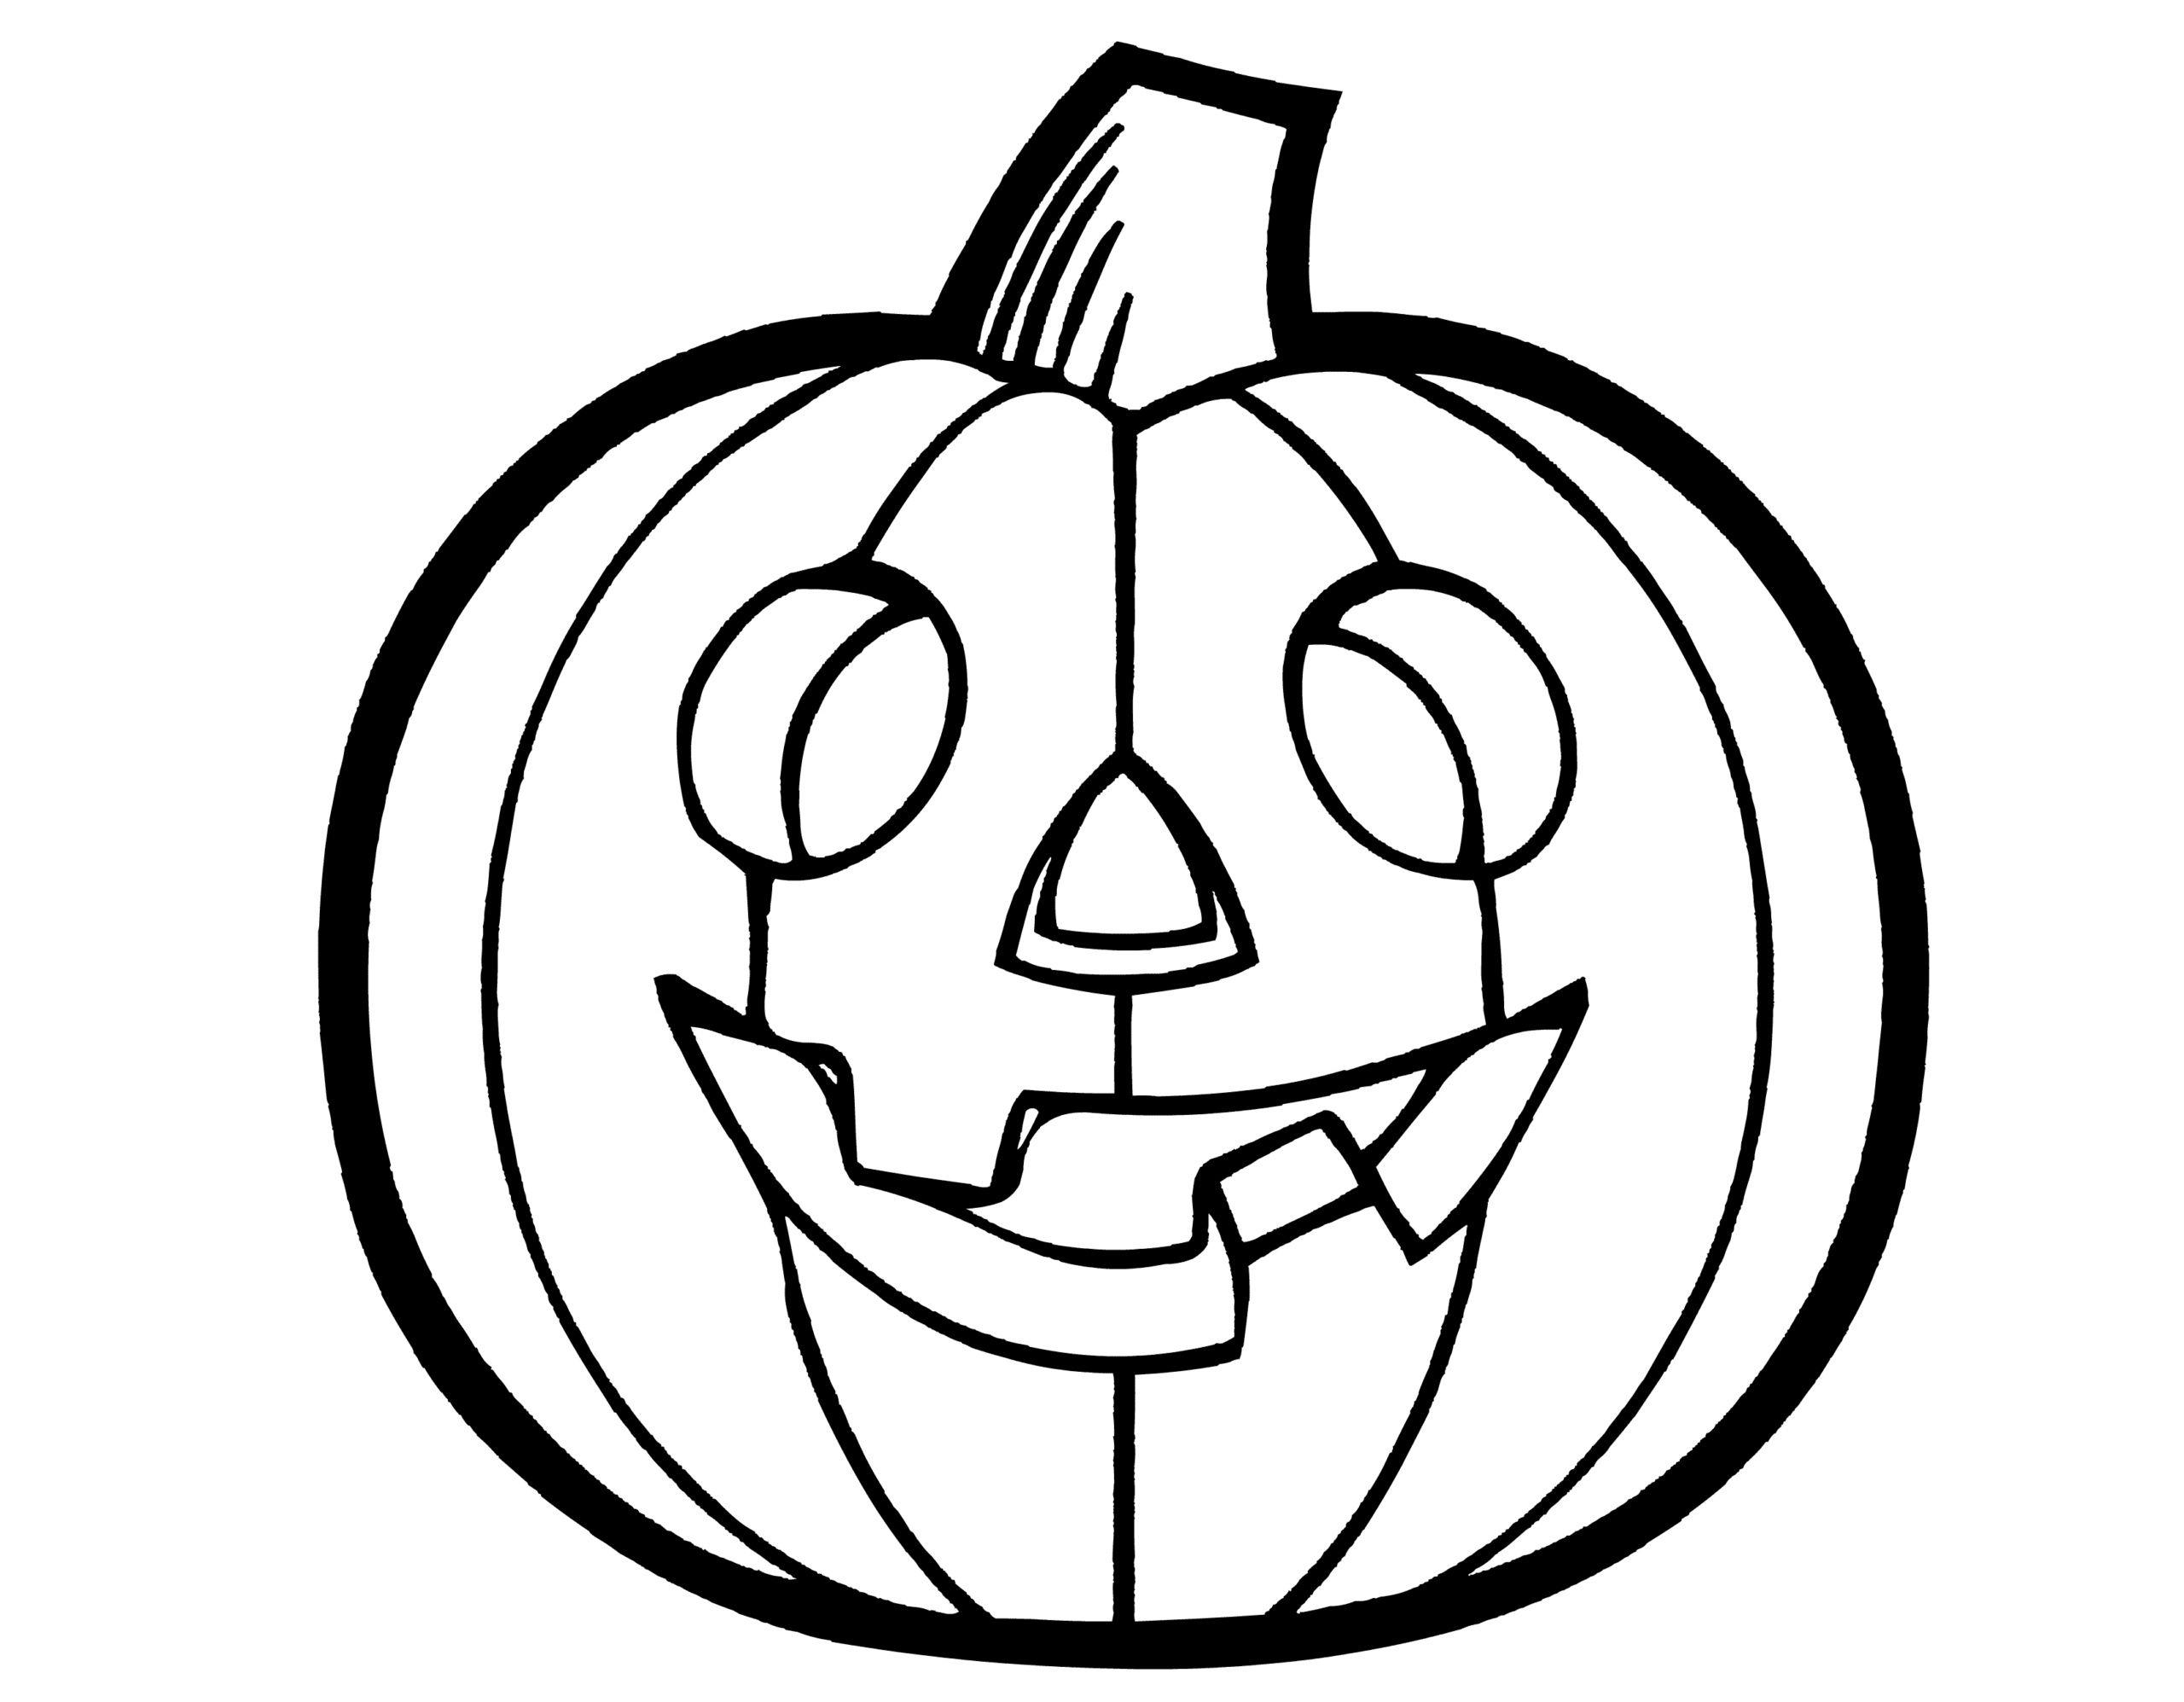 Pumpkin Coloring Pages for Harvest & Fall Season